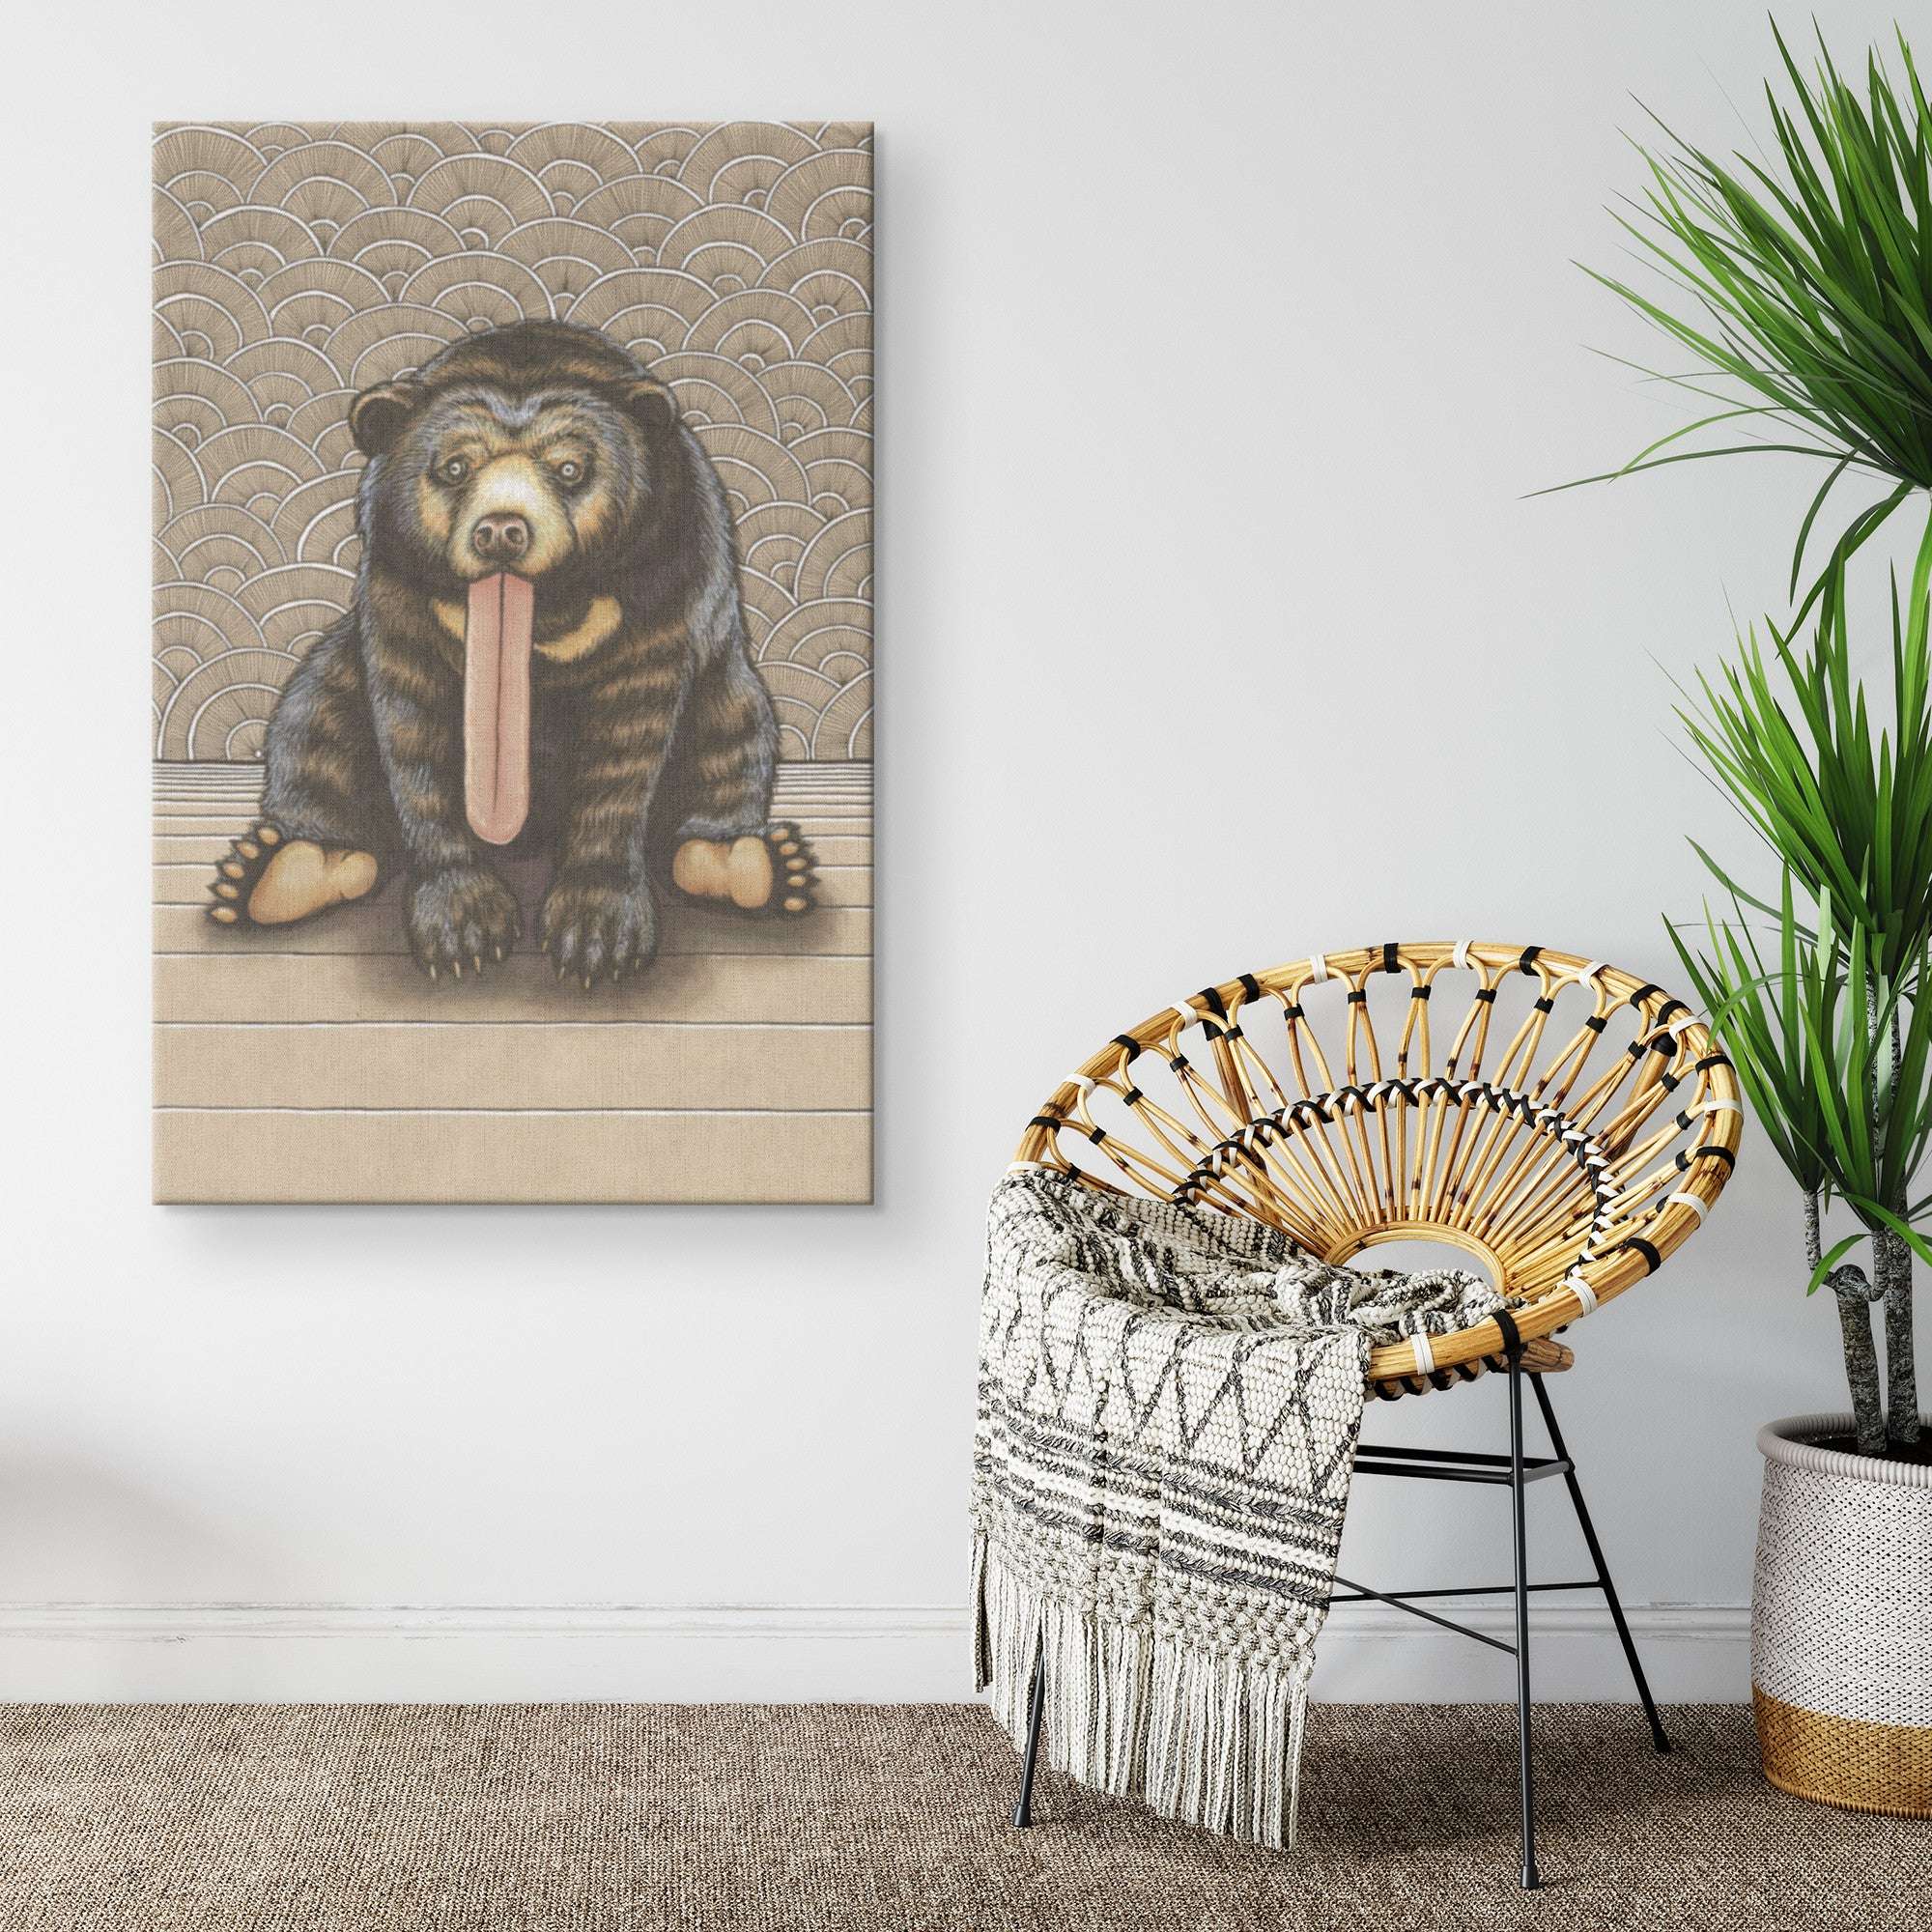 A whimsical Canvas Sun Bear Print depicting a bear with its tongue out, hanging on a white wall beside a stylish round chair with a patterned throw blanket.